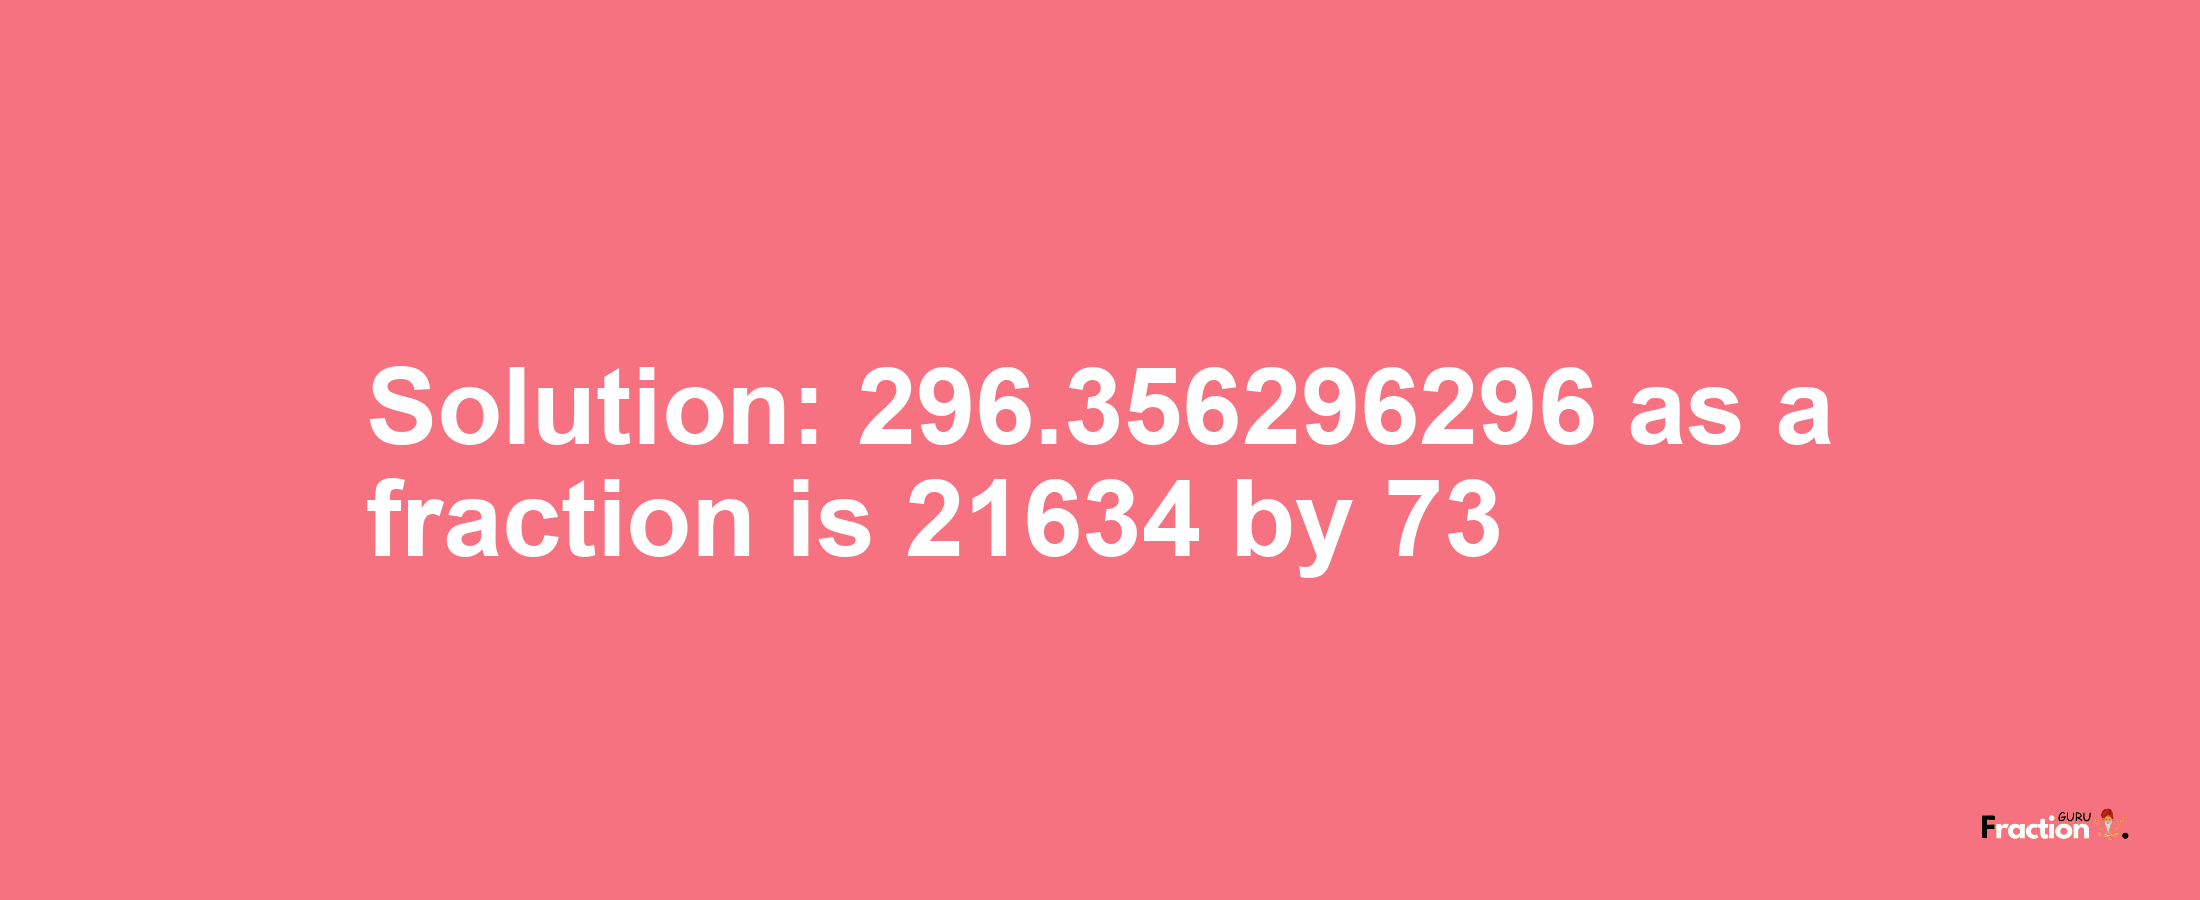 Solution:296.356296296 as a fraction is 21634/73